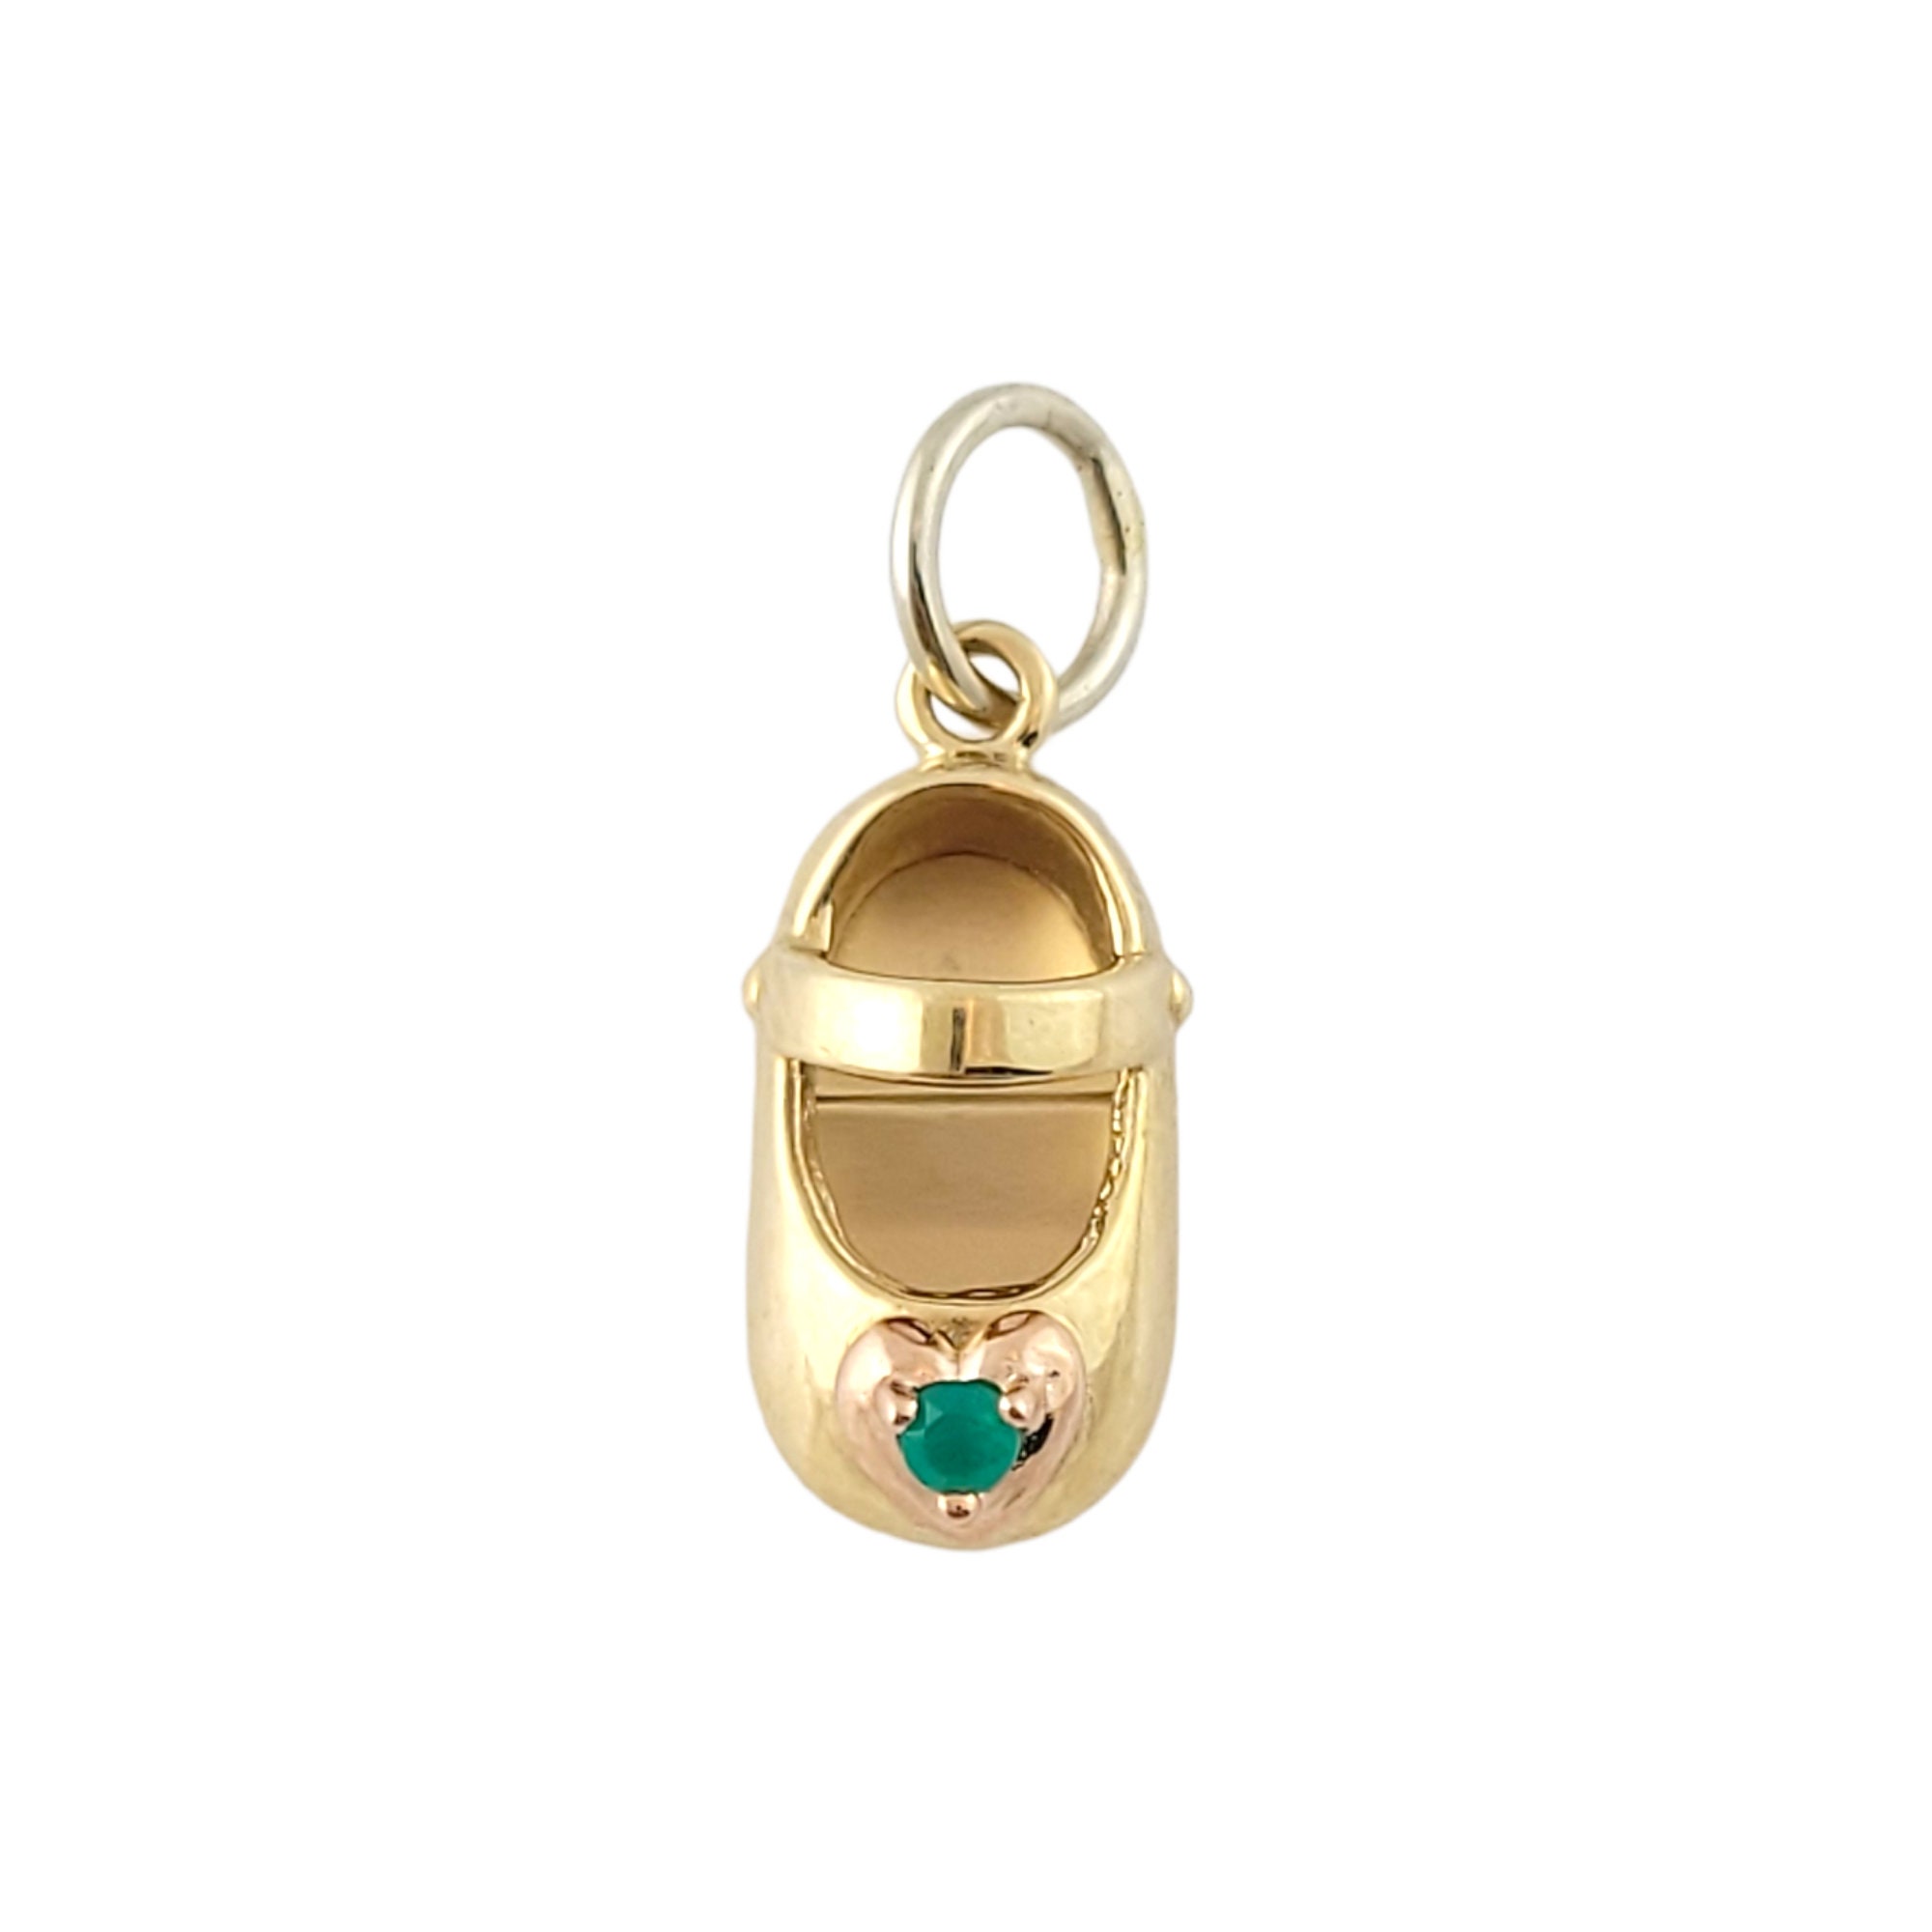 Rembrandt Charms Baby Shoe Charm with Simulated Aquamarine, 14K